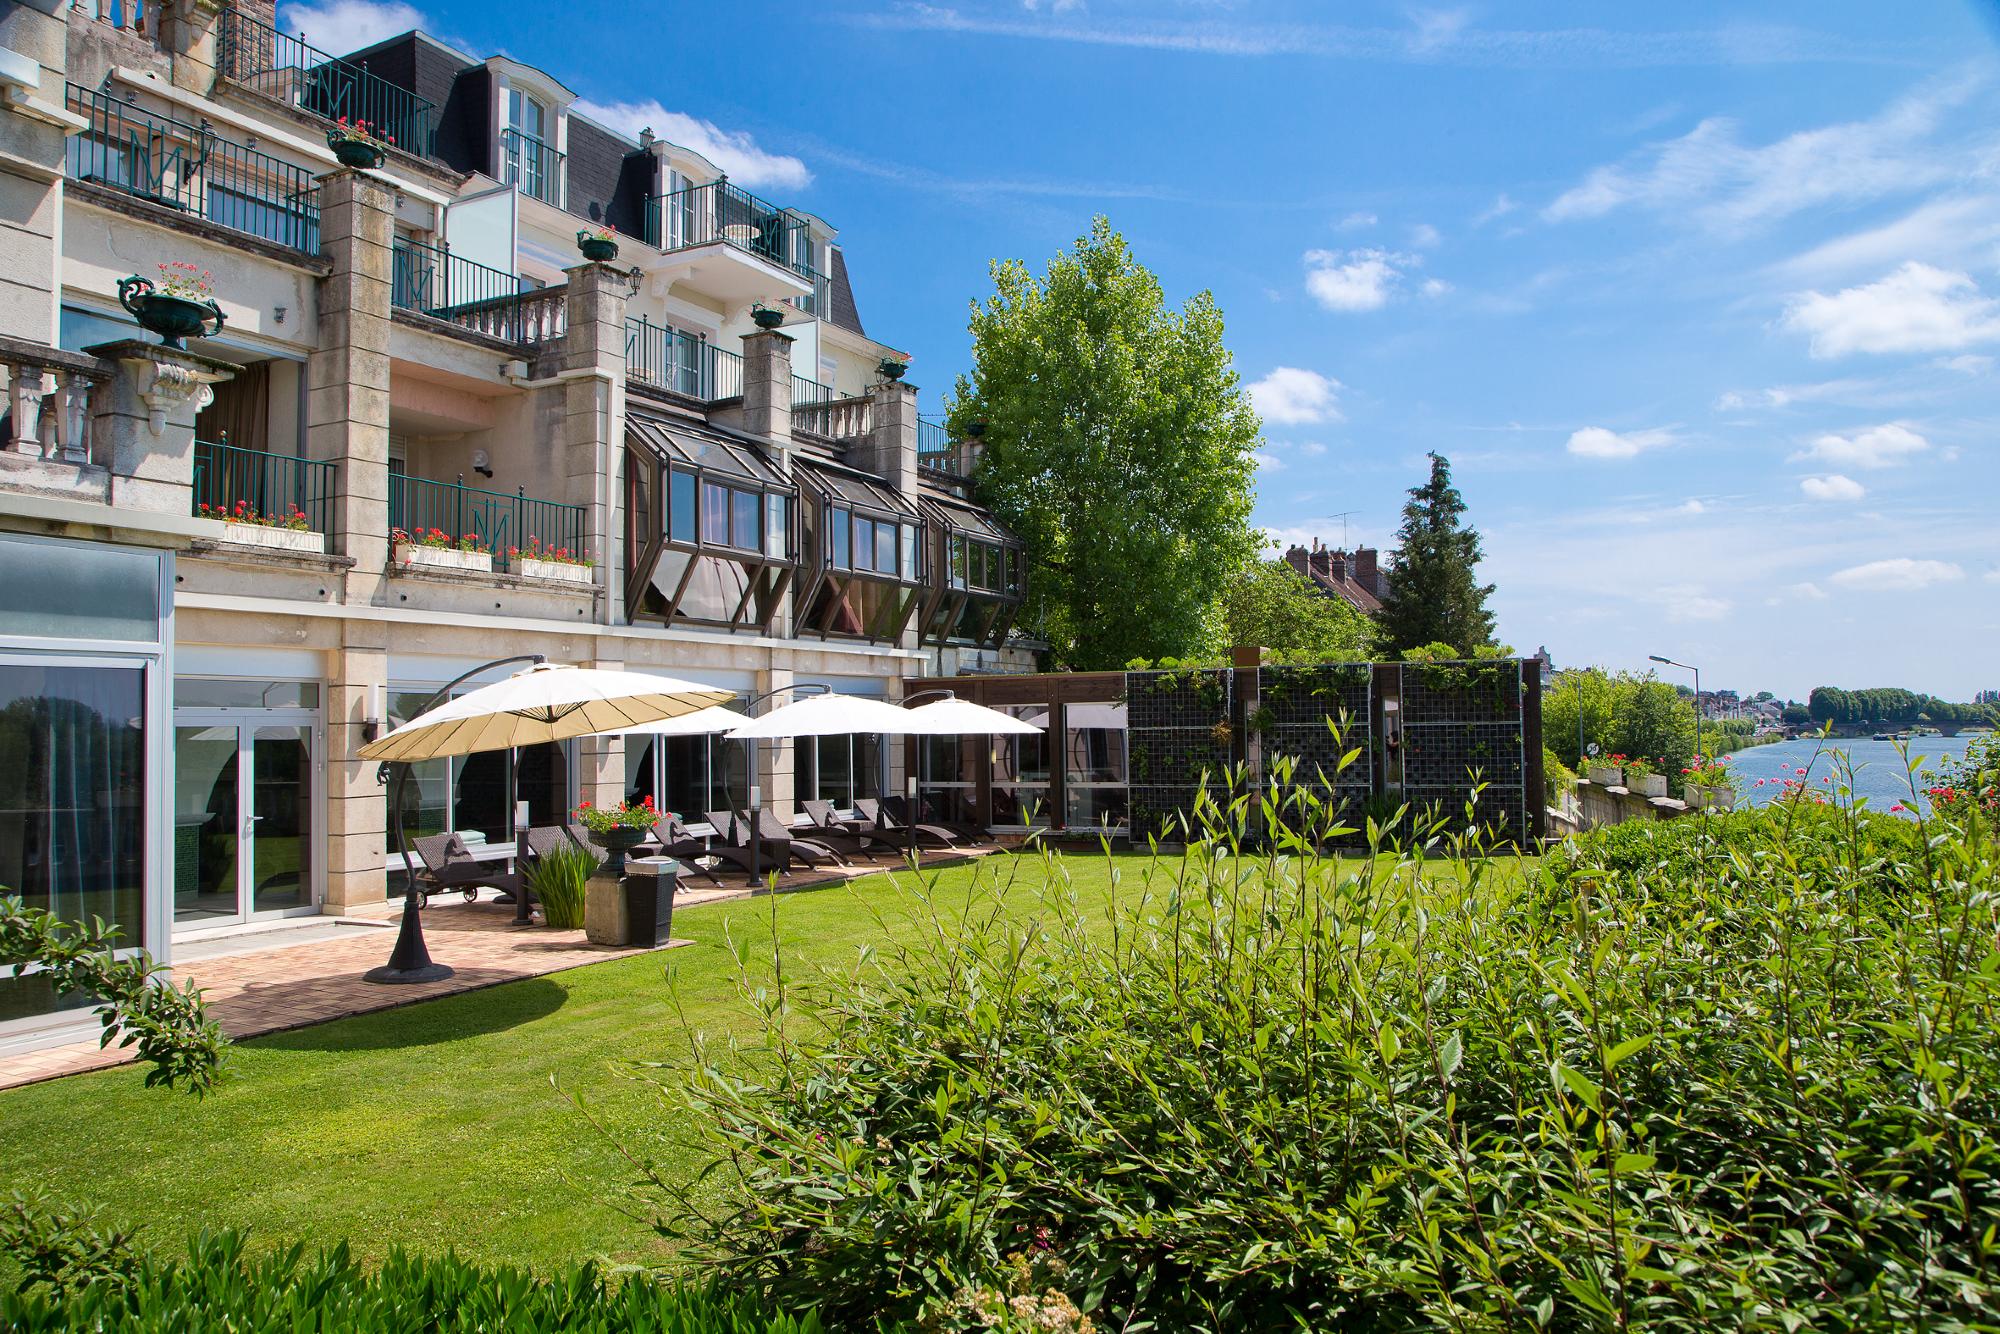 Relais & Châteaux in Burgundy, gastronomy and relaxation for your weekend